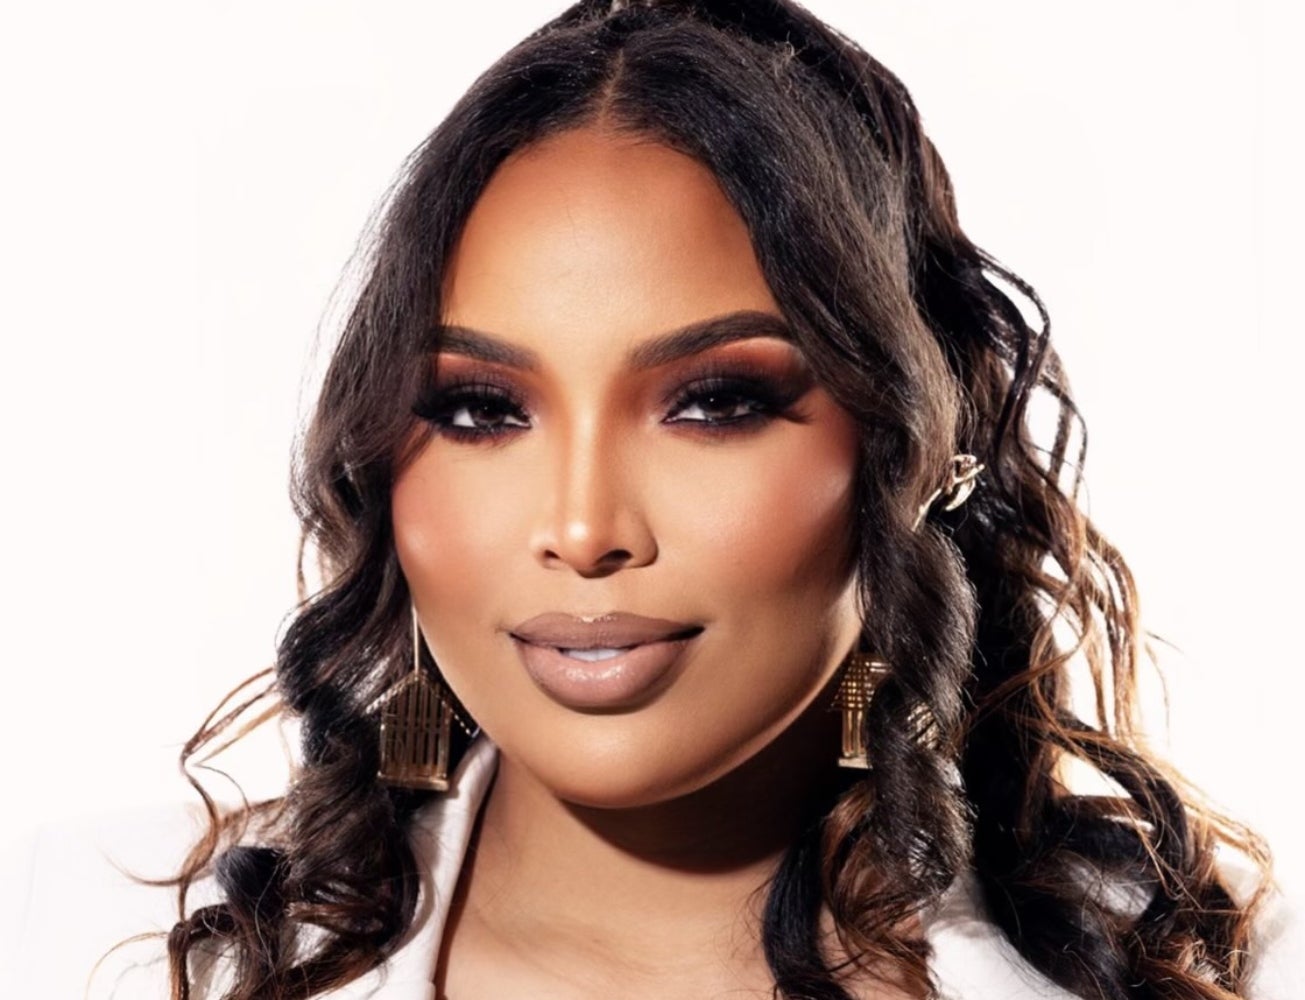 Losing Both Of Her Parents Back To Back Shaped Former 'Black Ink Crew' Star Charmaine Bey As A Mother